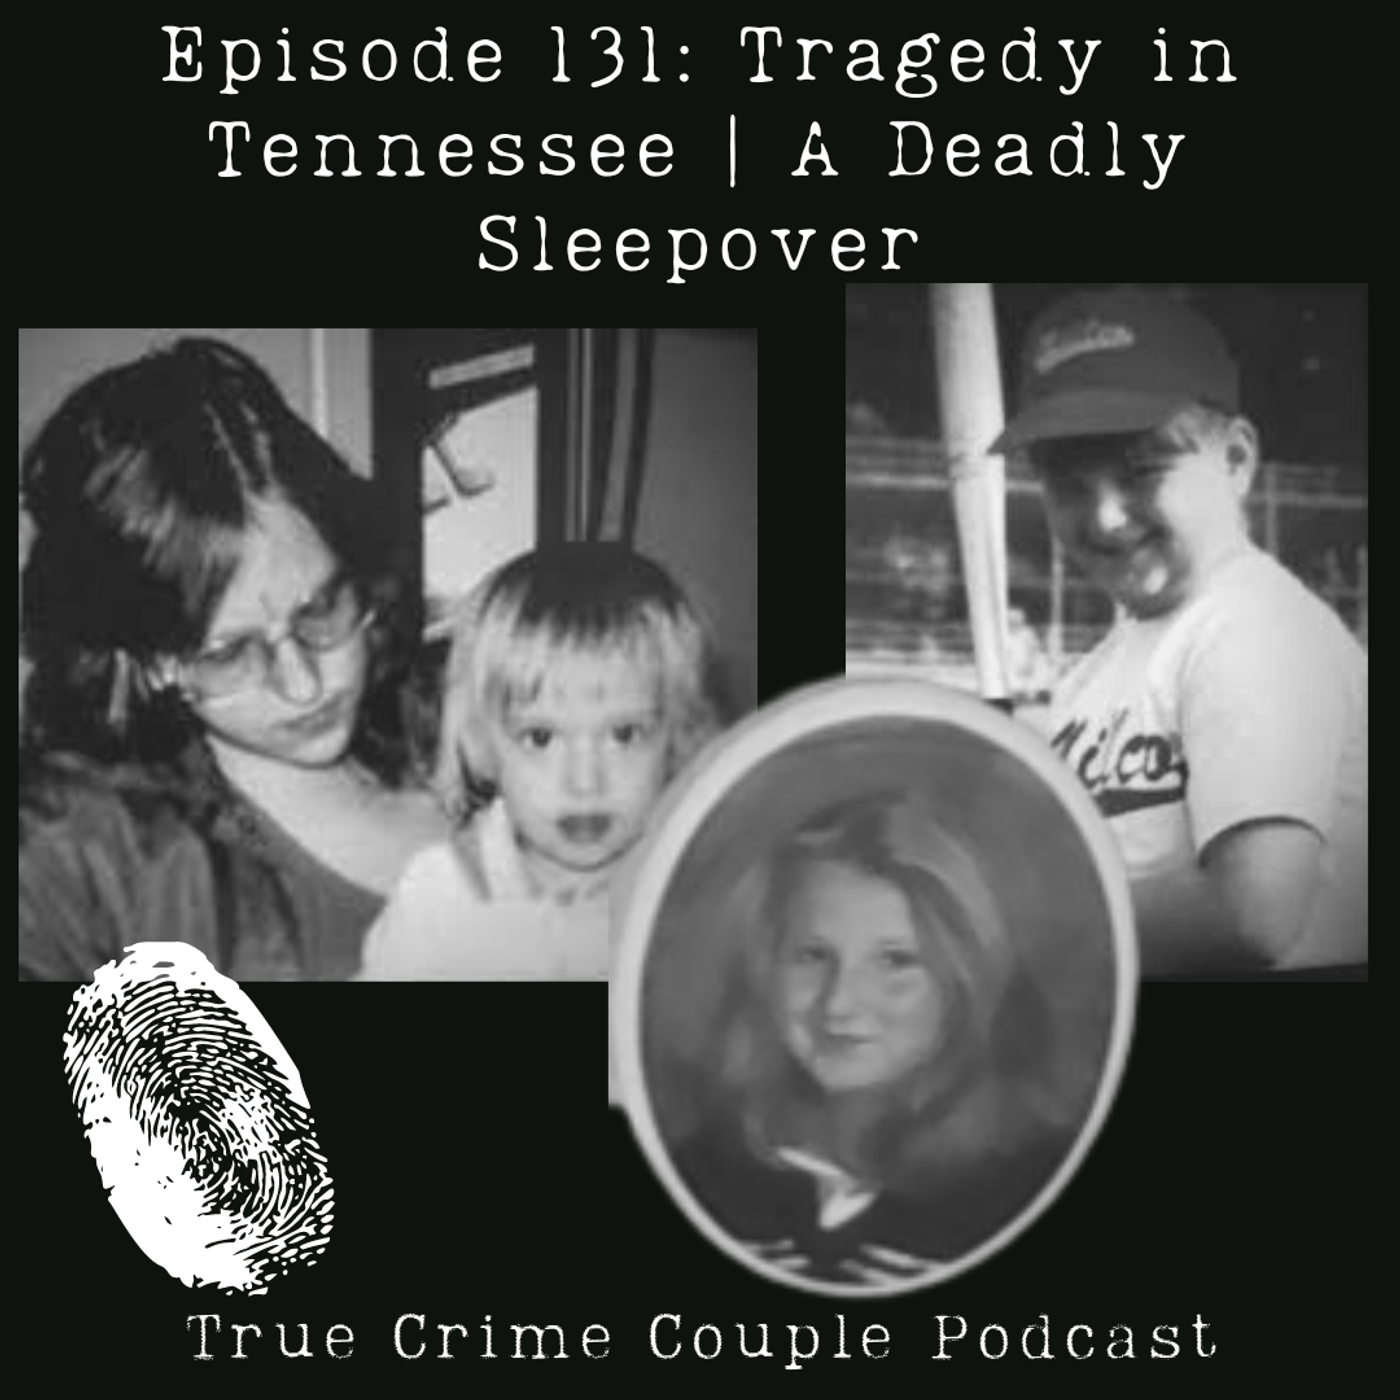 Episode 131: Tragedy in Tennessee | A Deadly Sleepover